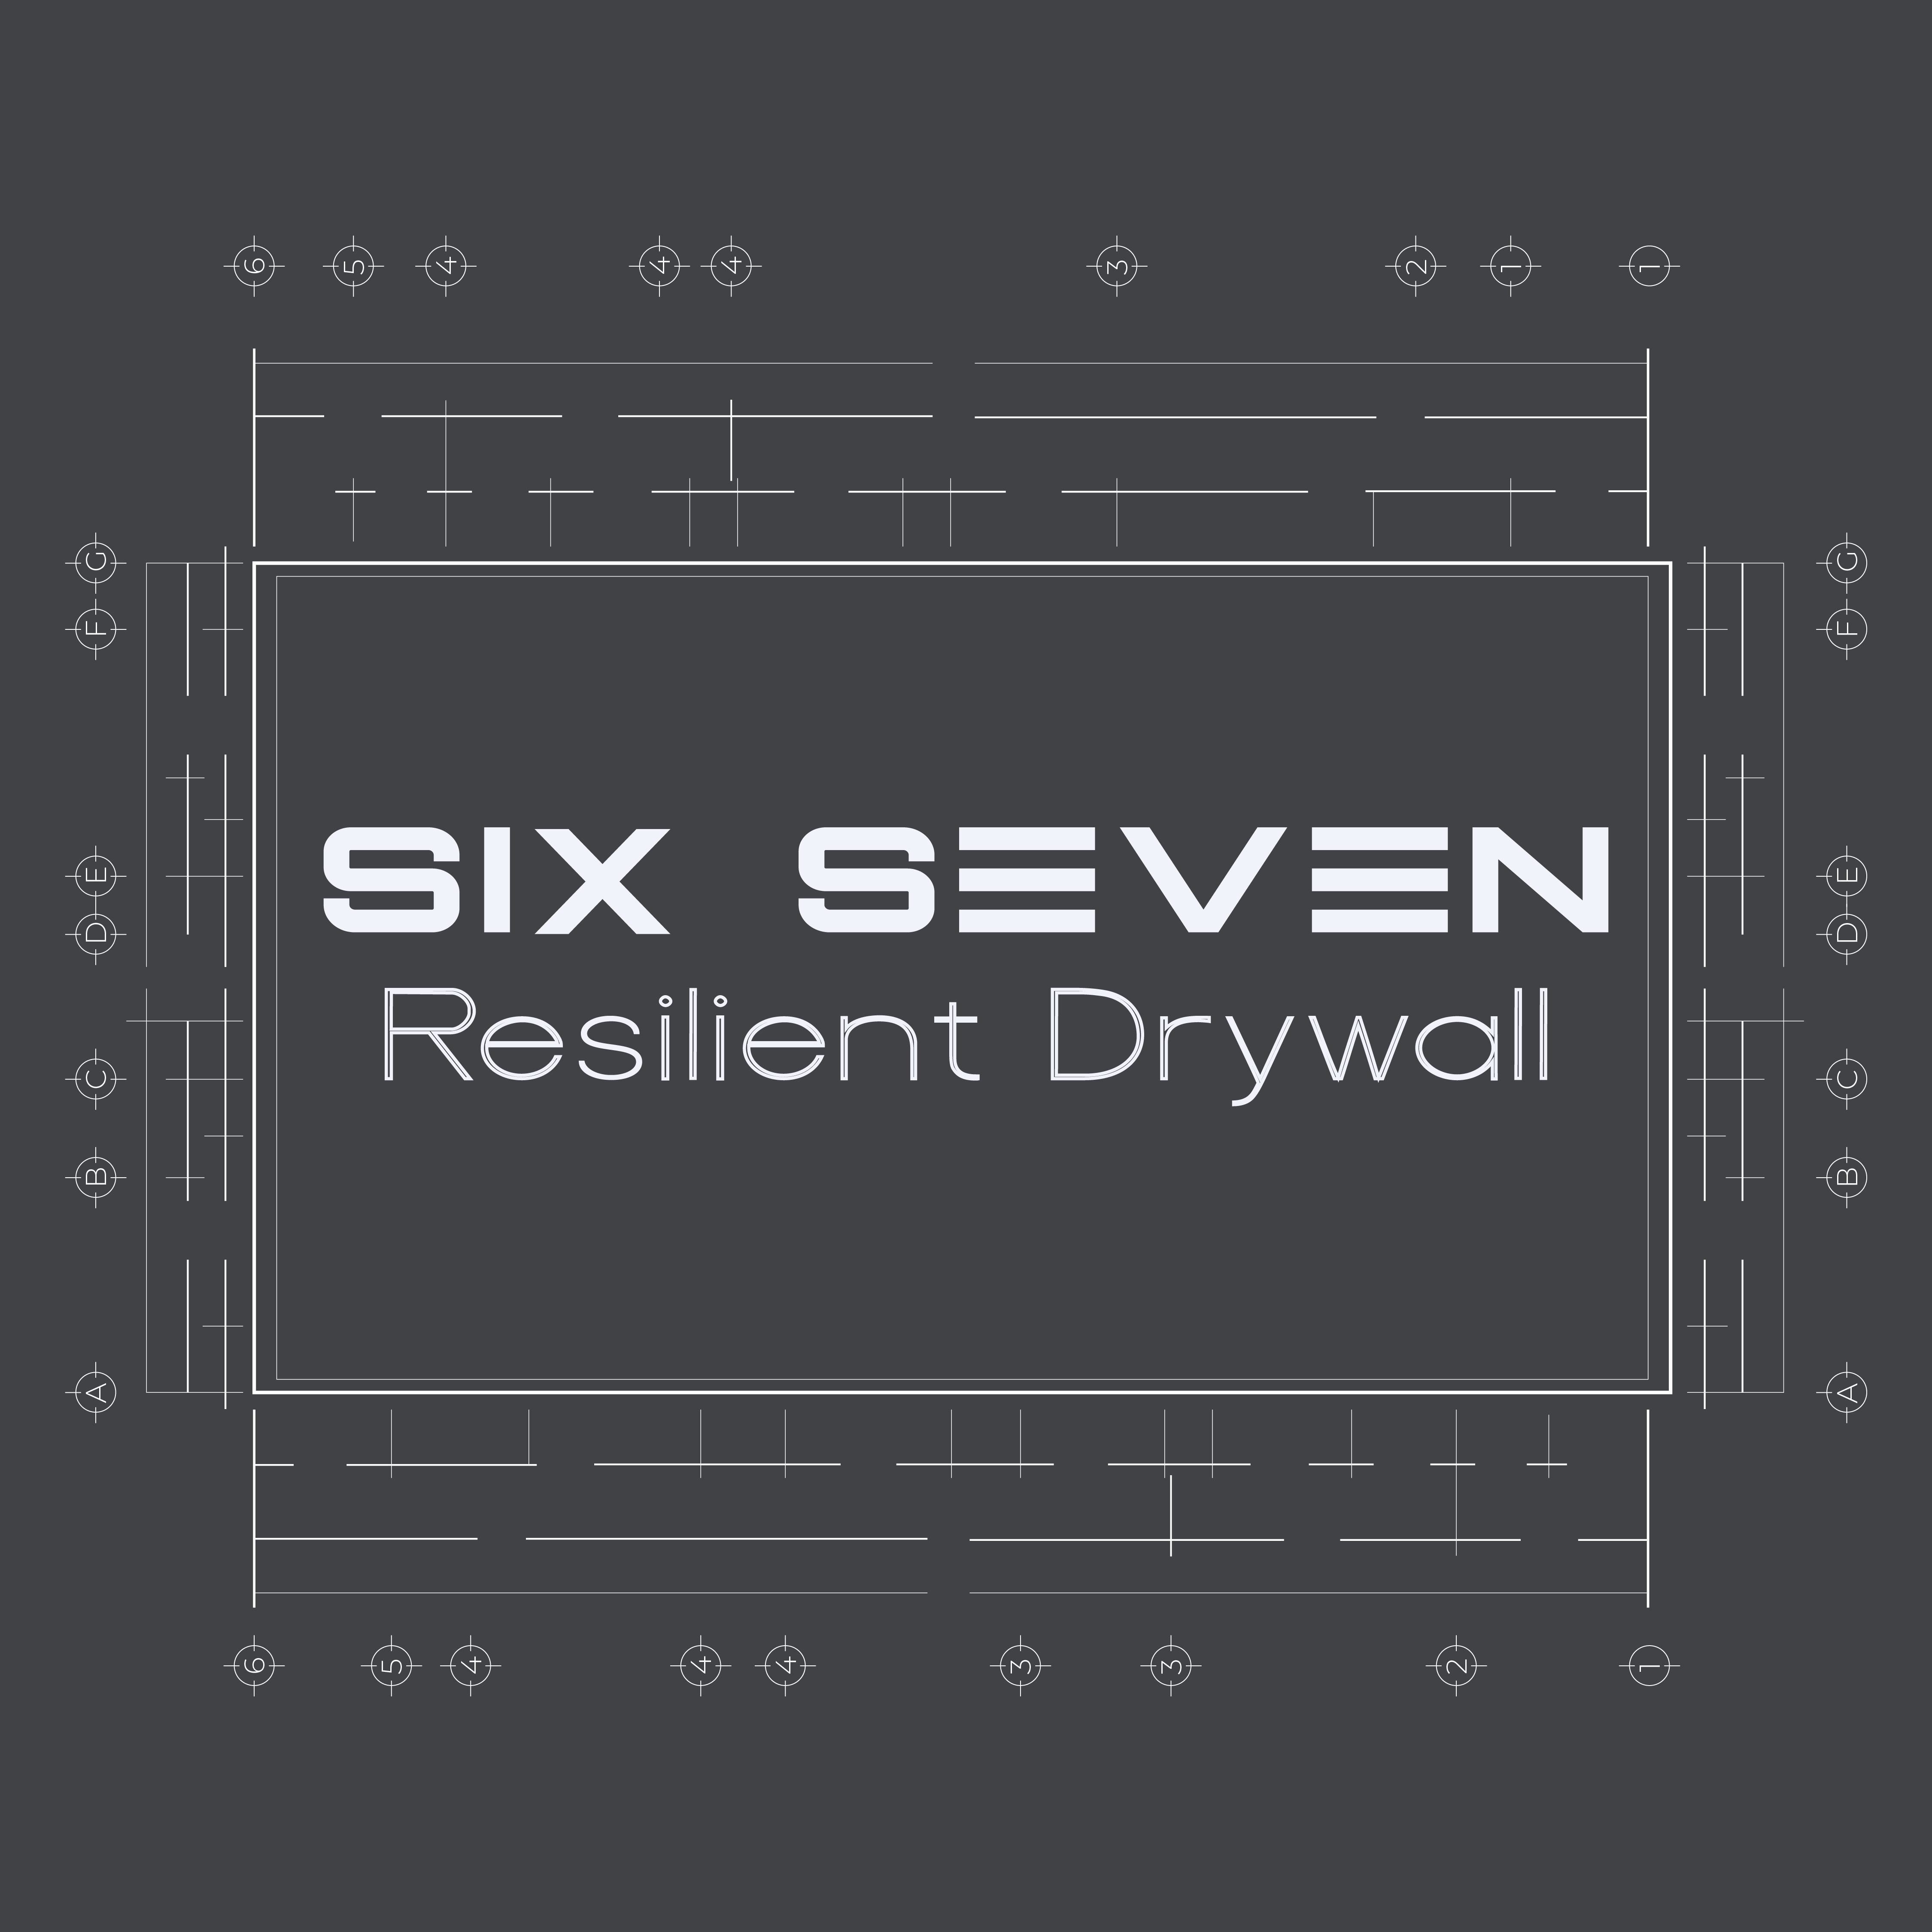 Six Seven Resilient Drywall Logo